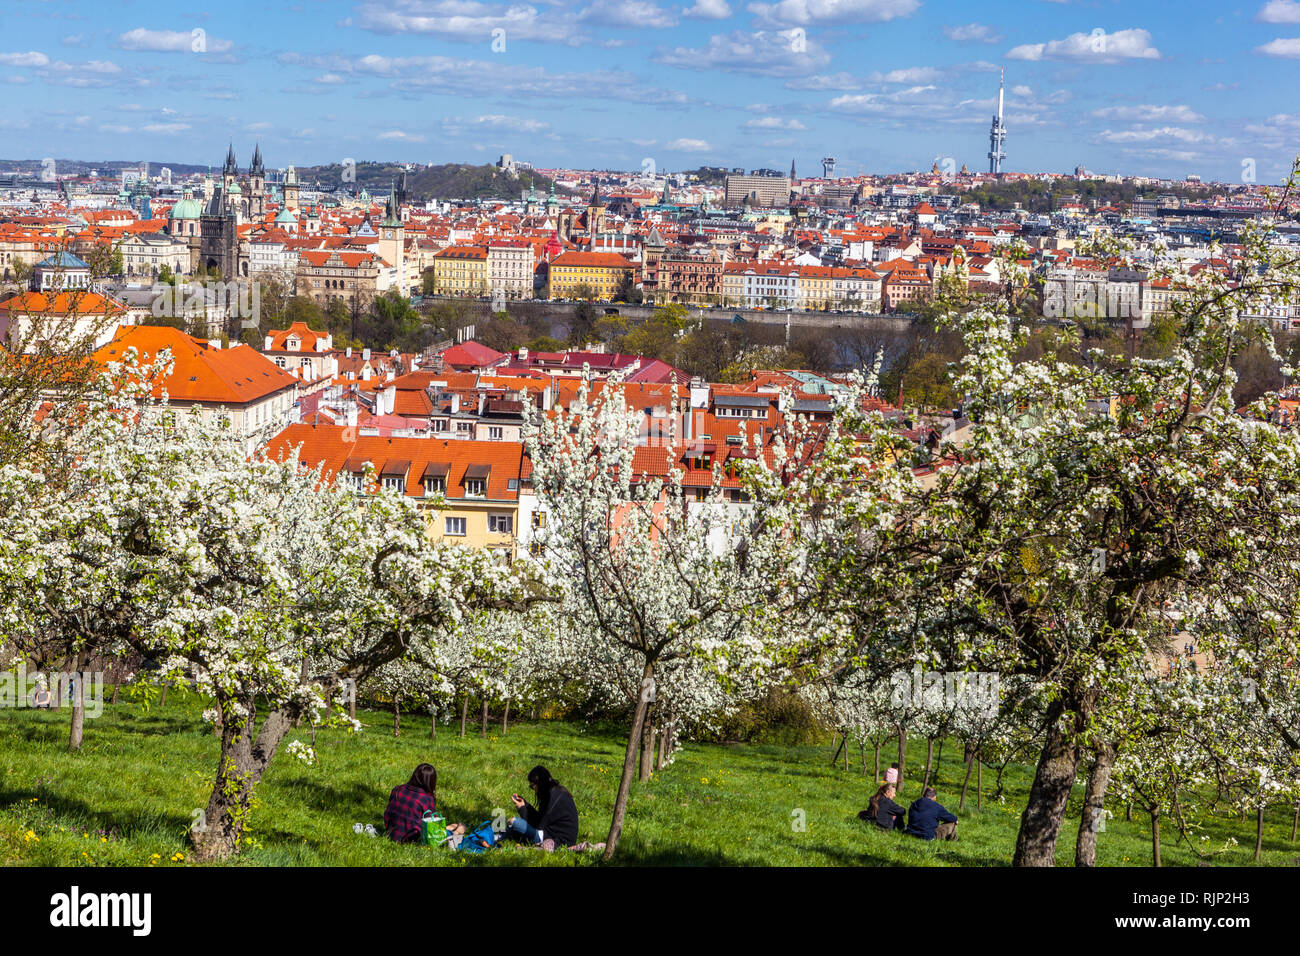 Blooming trees in Petrin Park, early spring suitable for a romantic walk overlooking Mala Strana Prague Czech Republic Petrin Hill Prague view Stock Photo